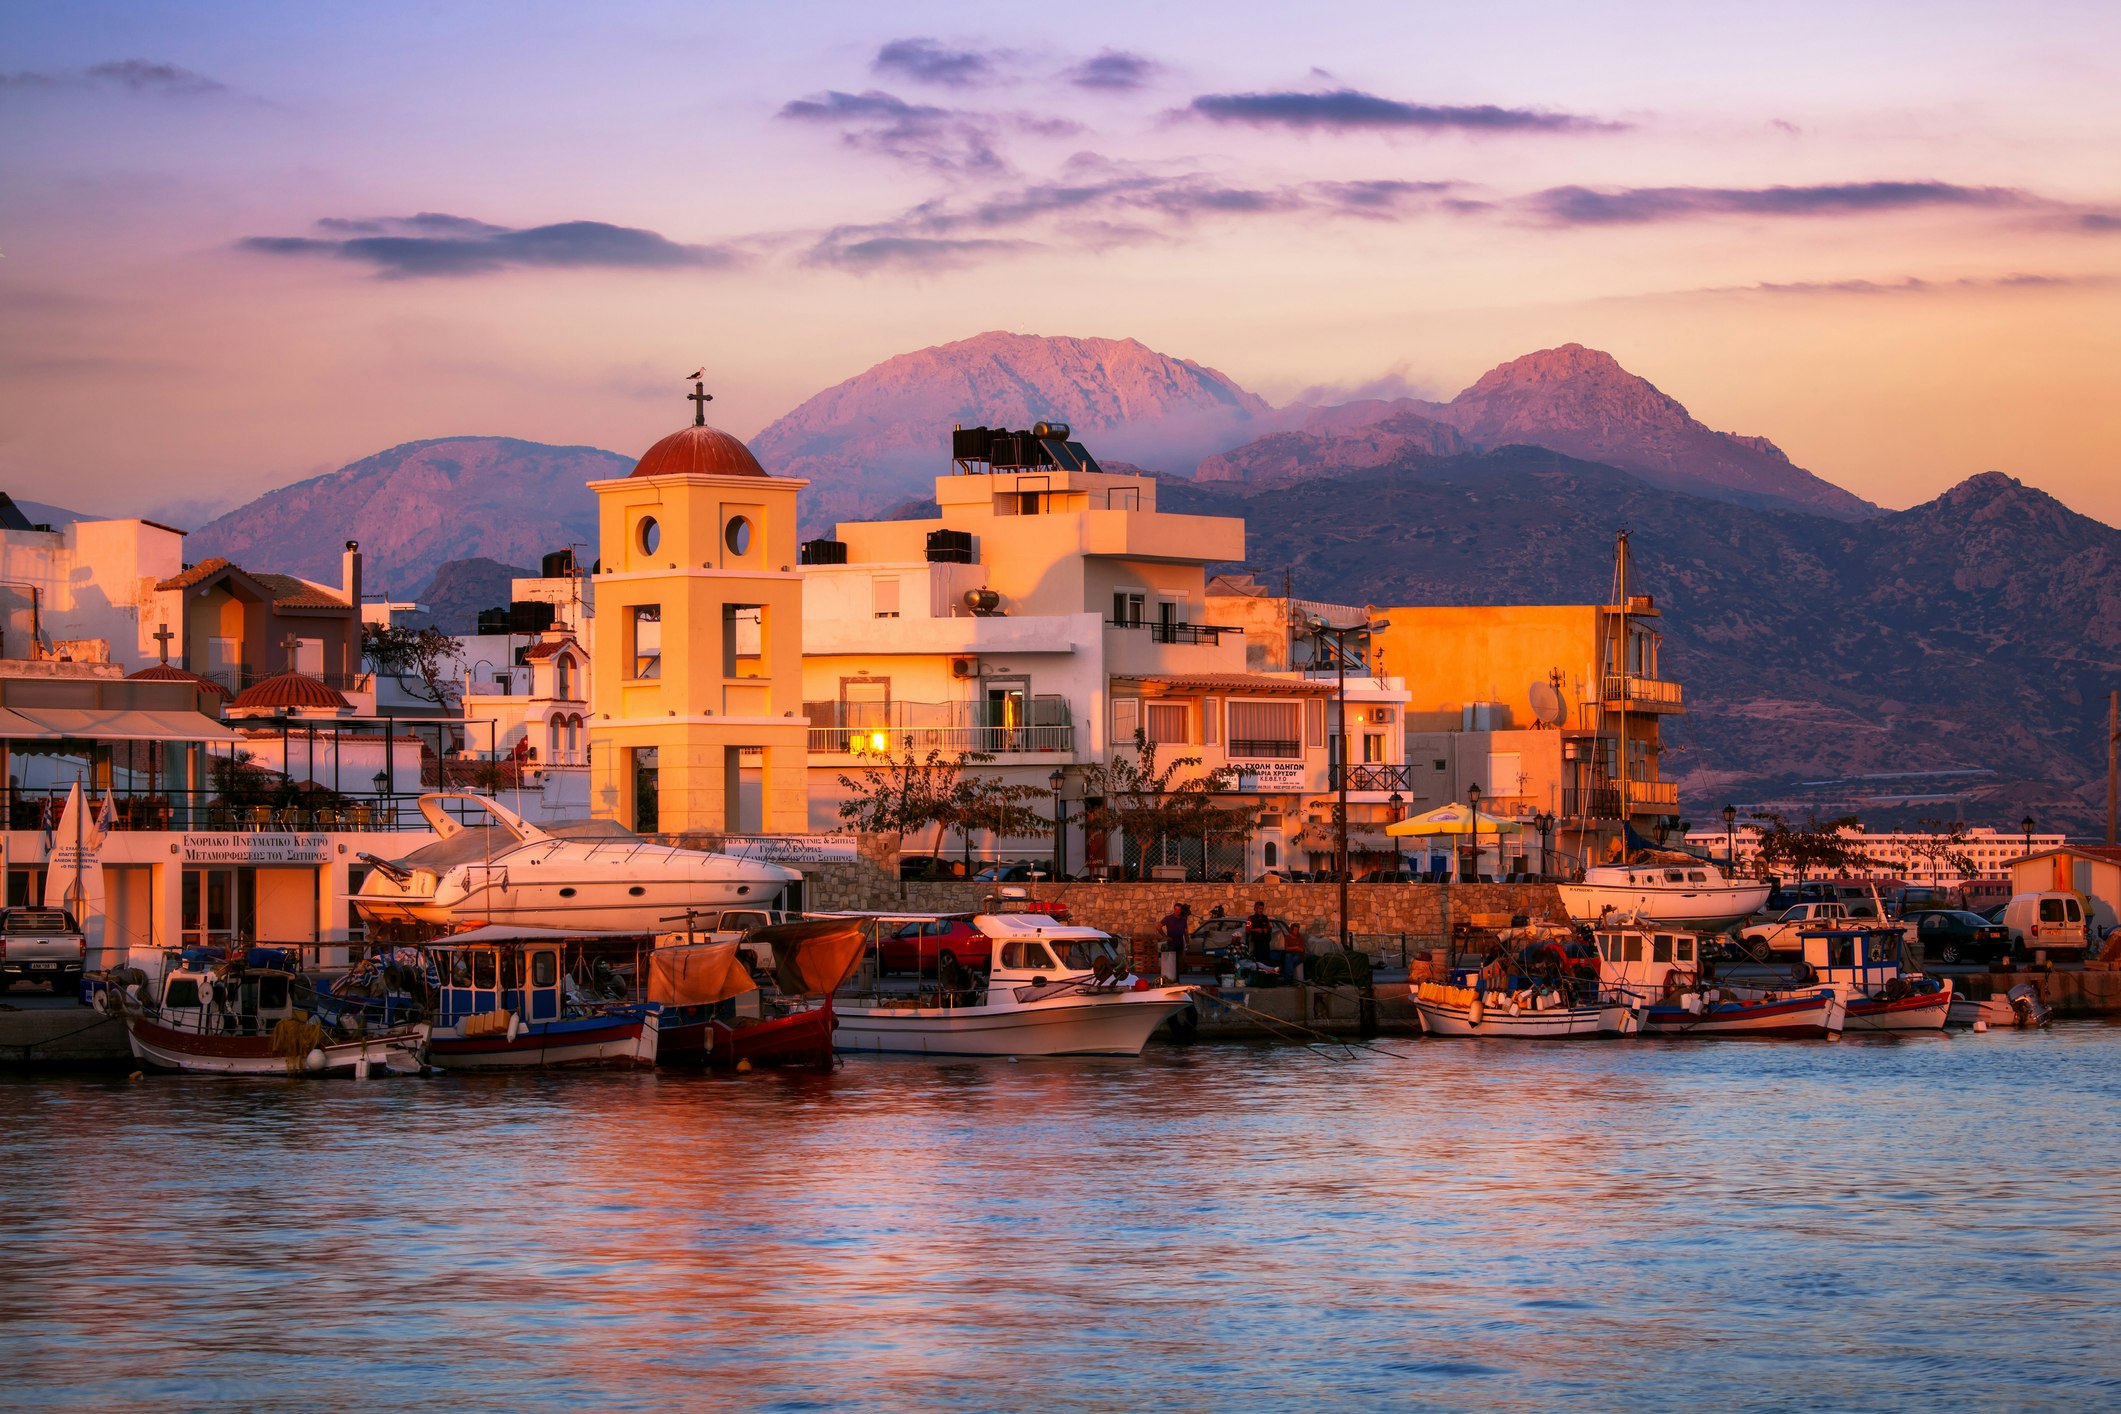 A sunset in the town of Ierapetra on the Greek island of Crete